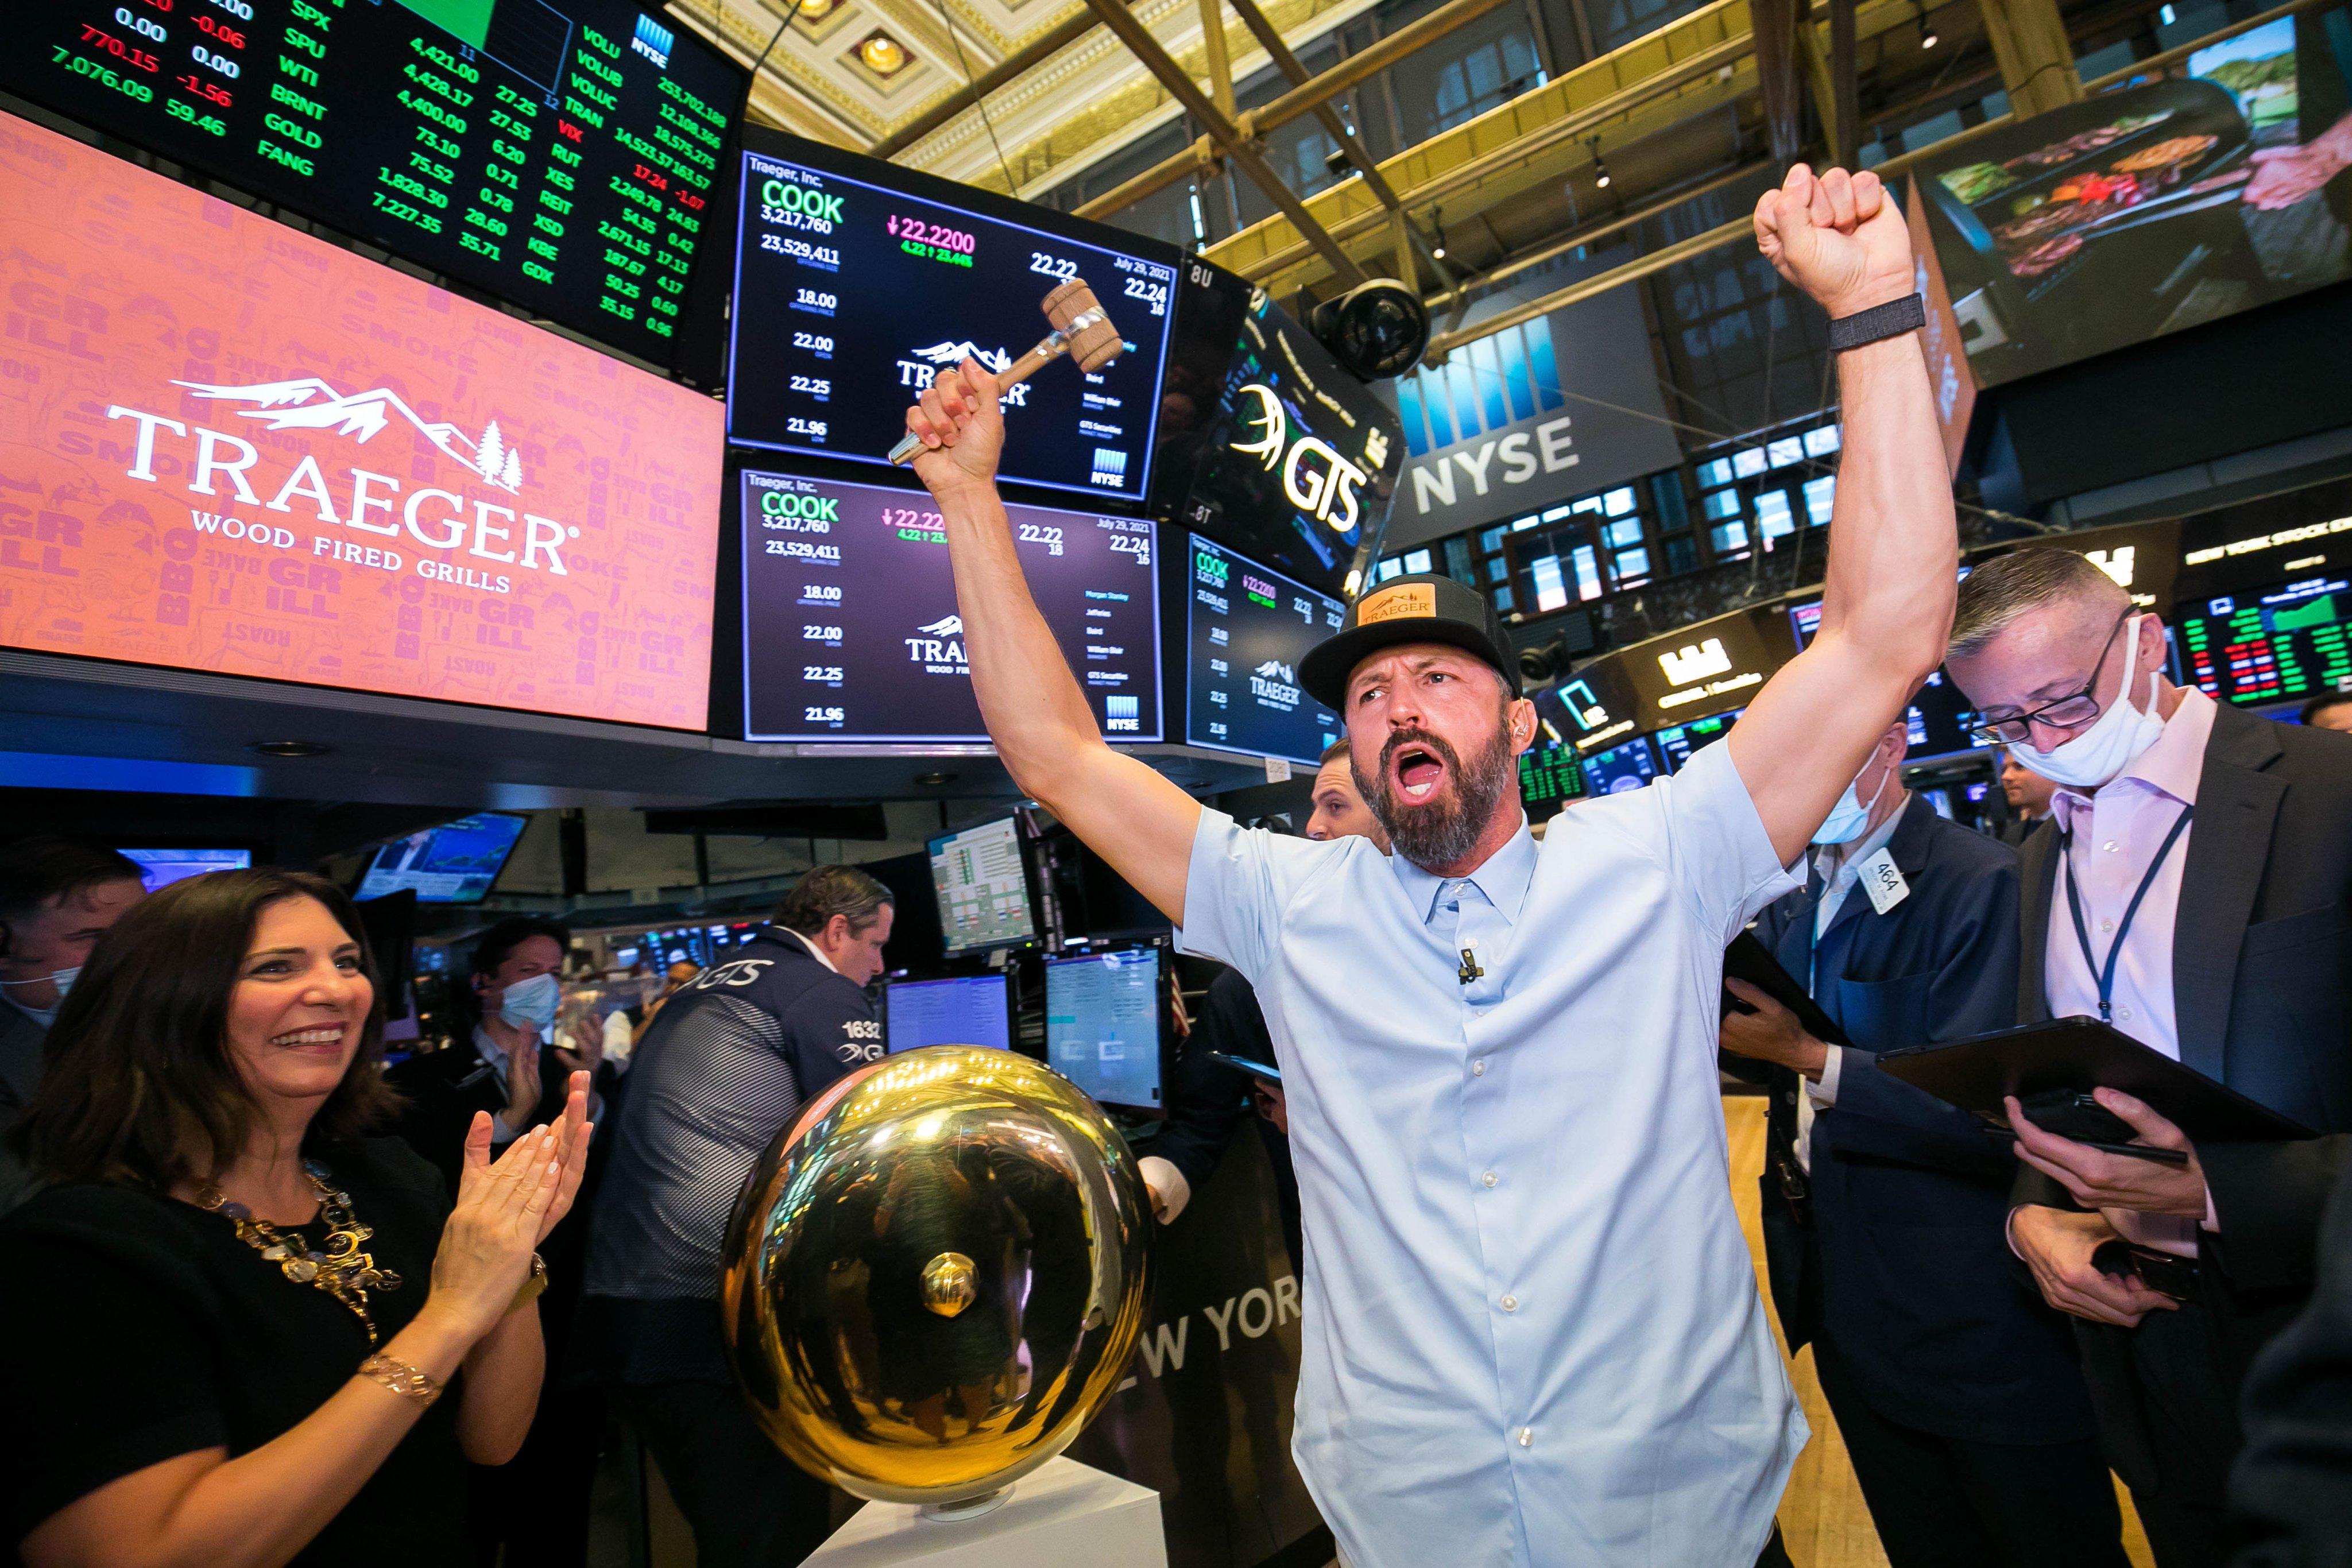 Traeger debuts on the NYSE